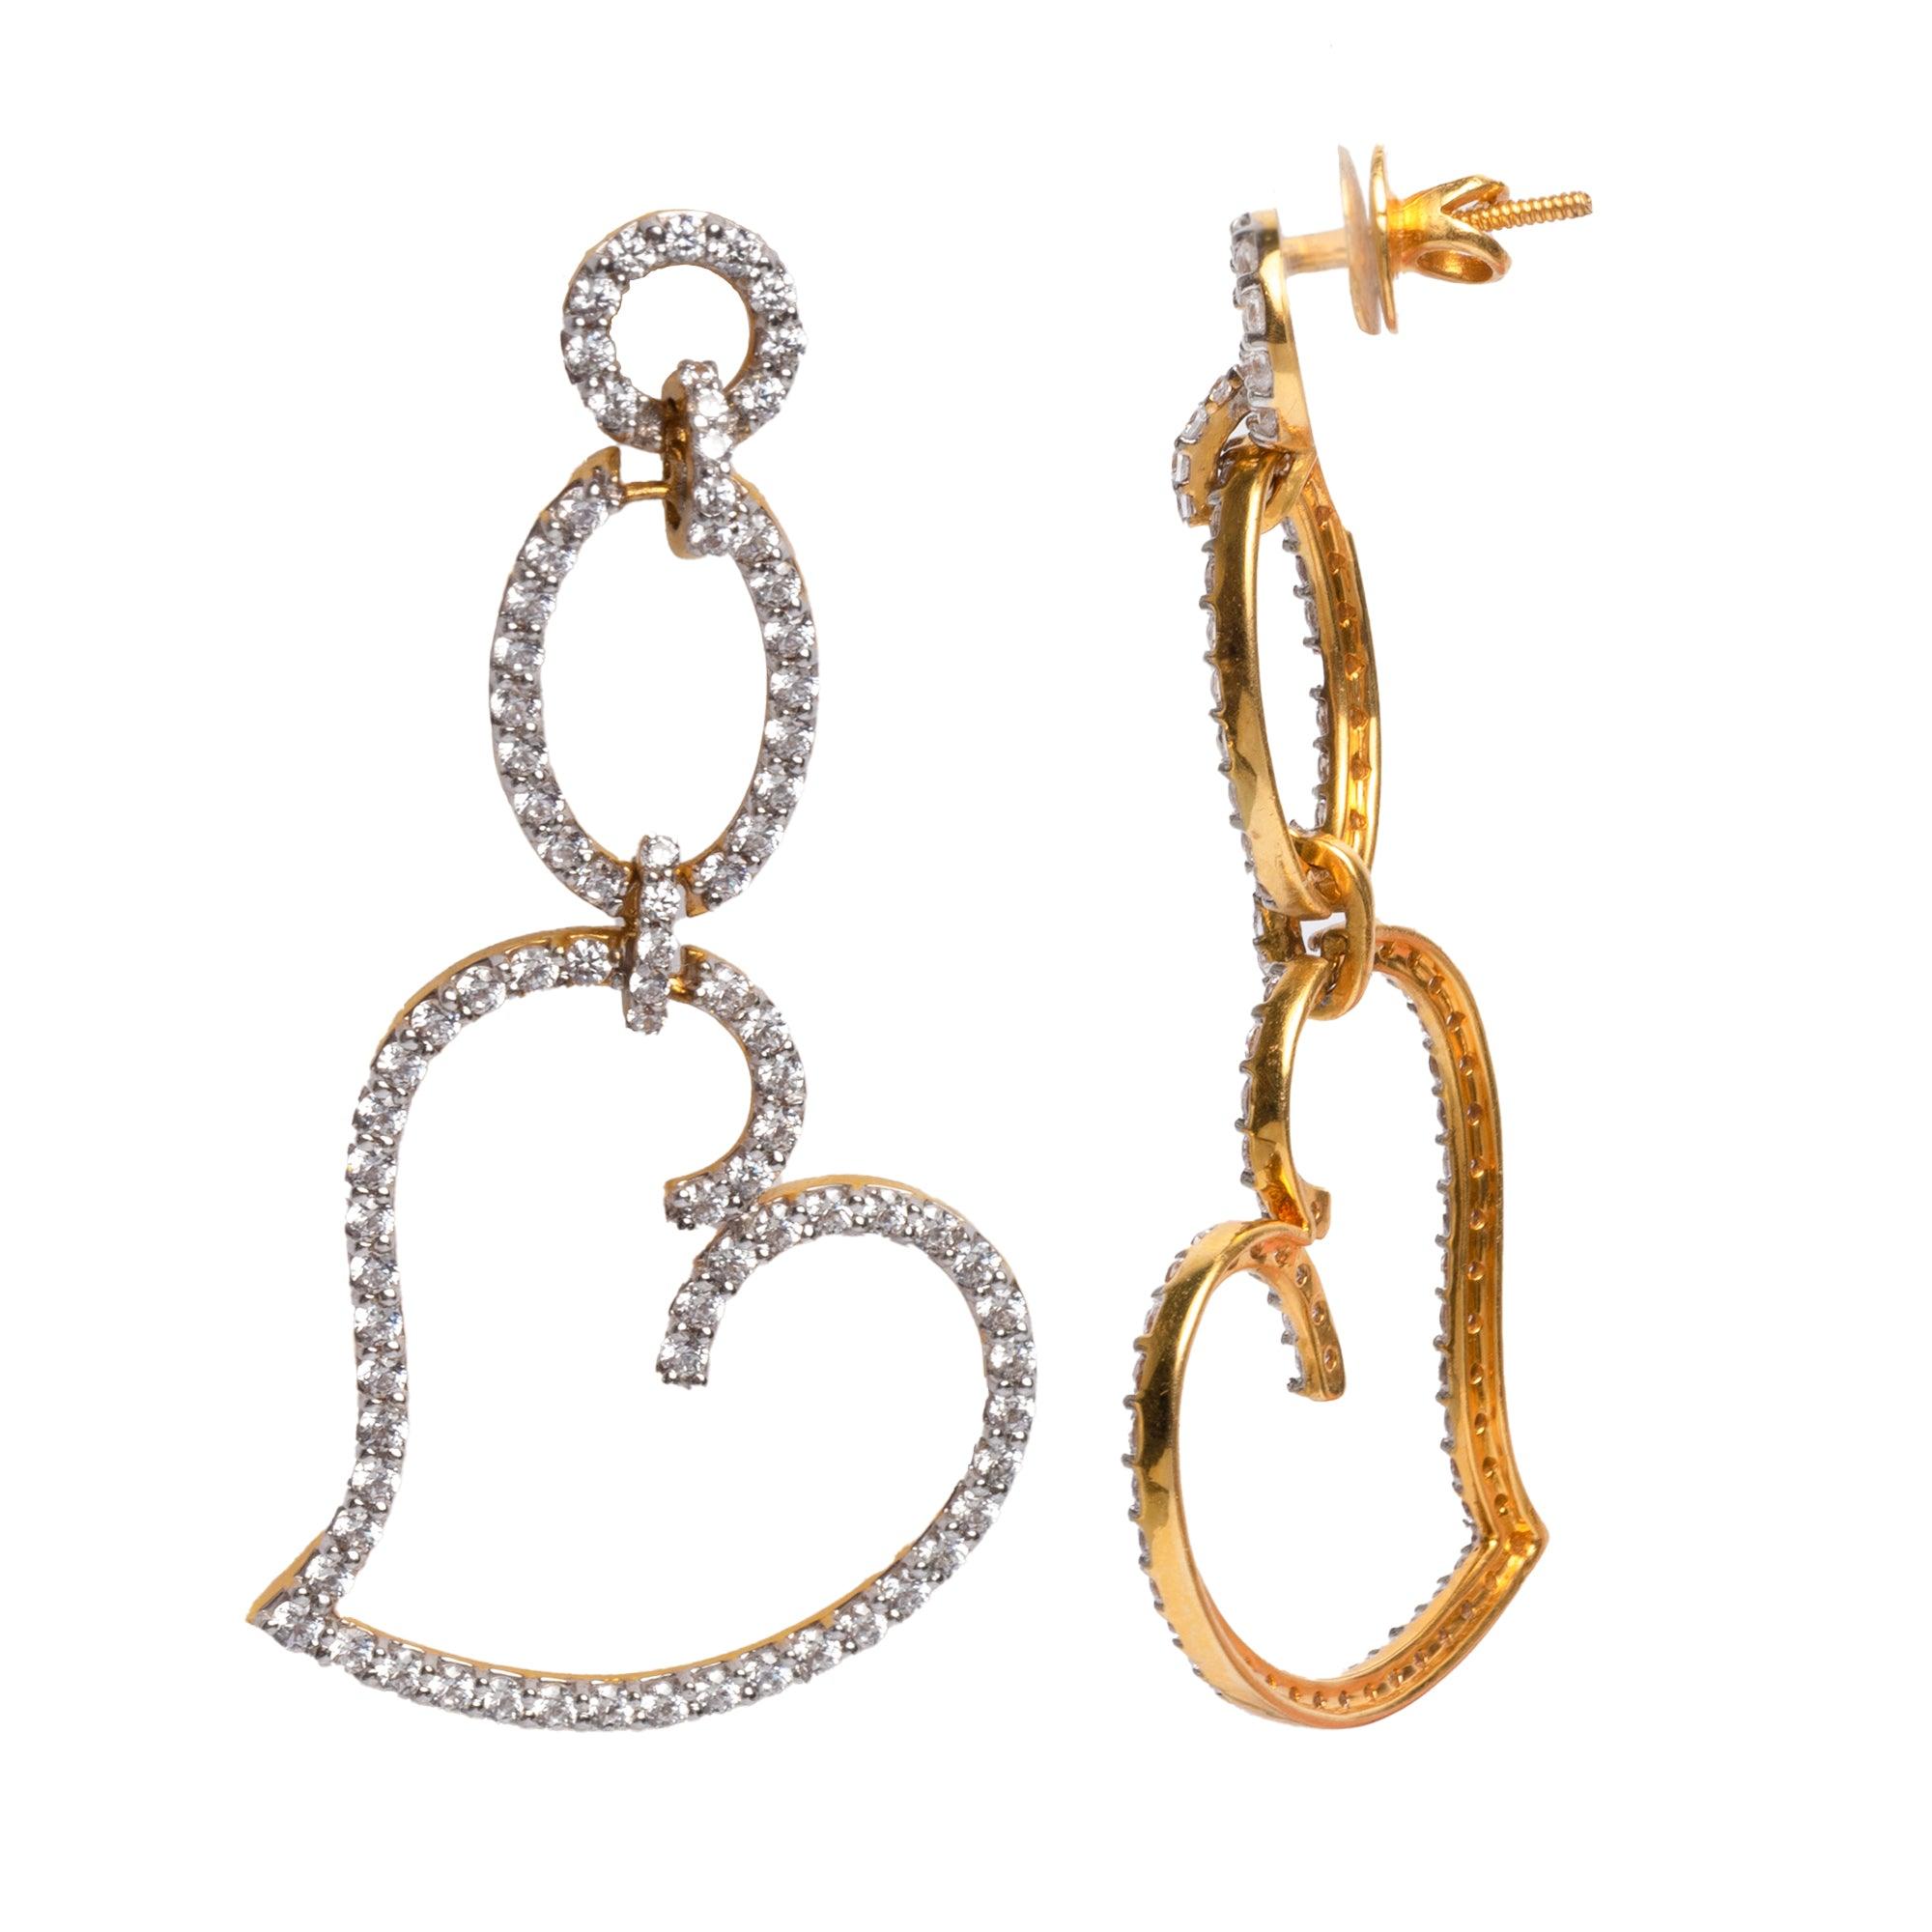 22ct Gold 'Heart' Earrings with Cubic Zirconia stones (12.87g) E-3053 - Minar Jewellers